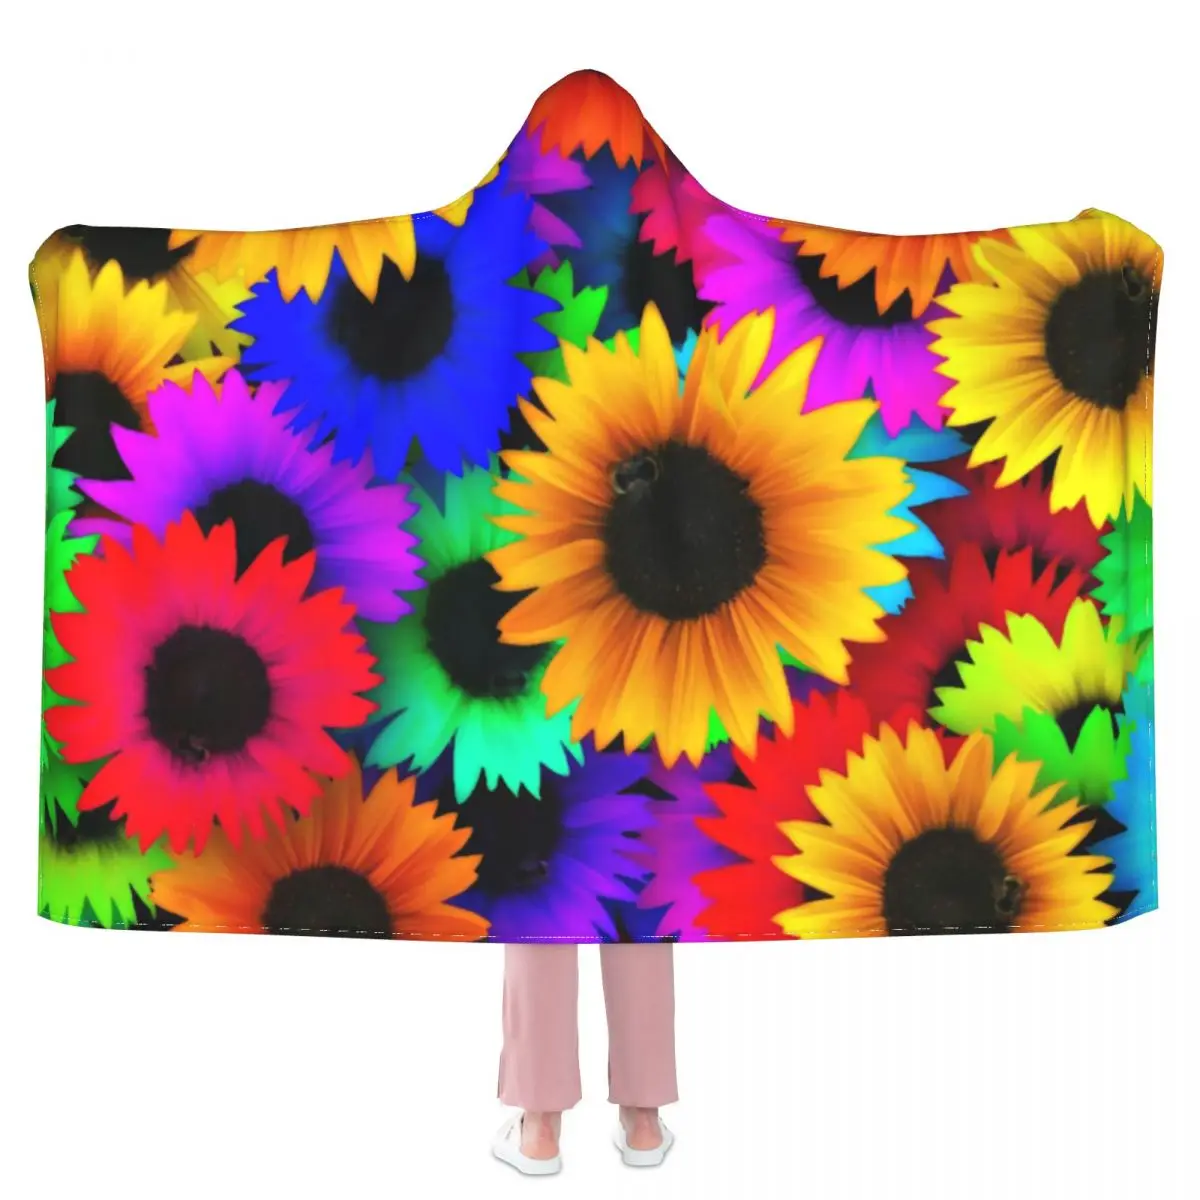 

Colorful Sunflower Blanket Cheerful Flowers Print Fashion Cool Hooded Bedspread Fleece Travel Super Soft Blanket